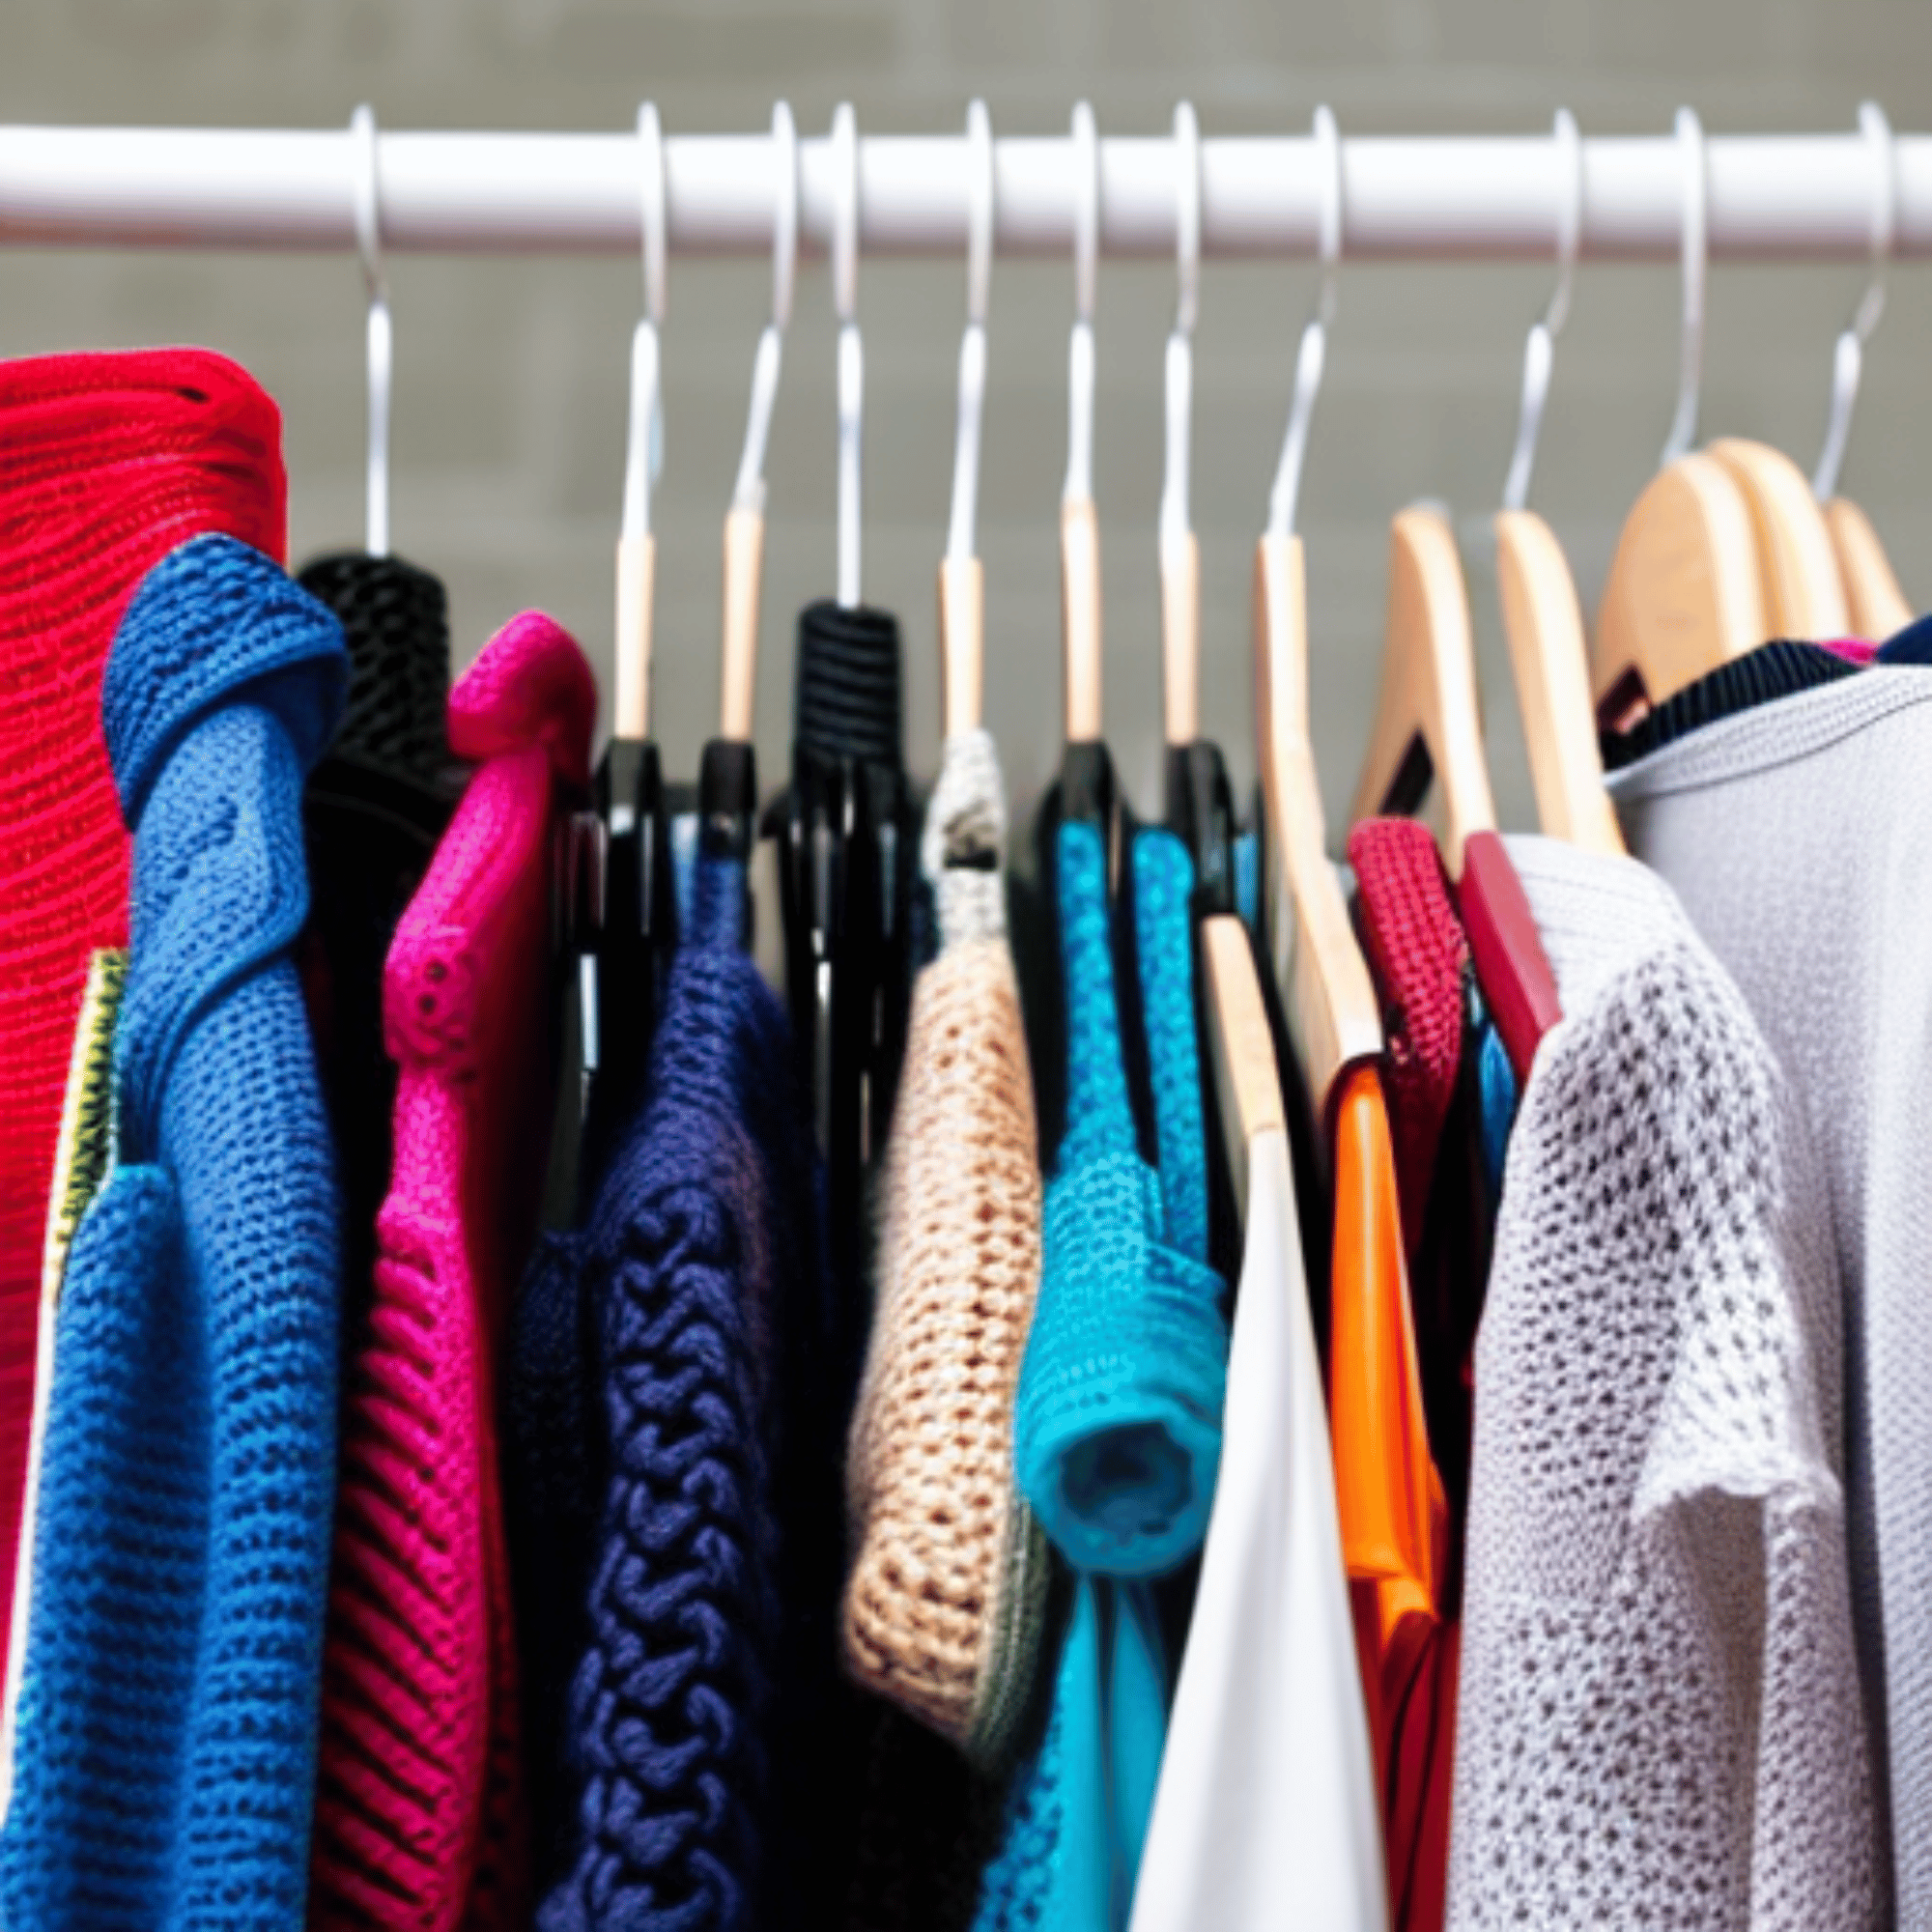 A variety of crocheted and knitted clothing items hung up on a clothing rack